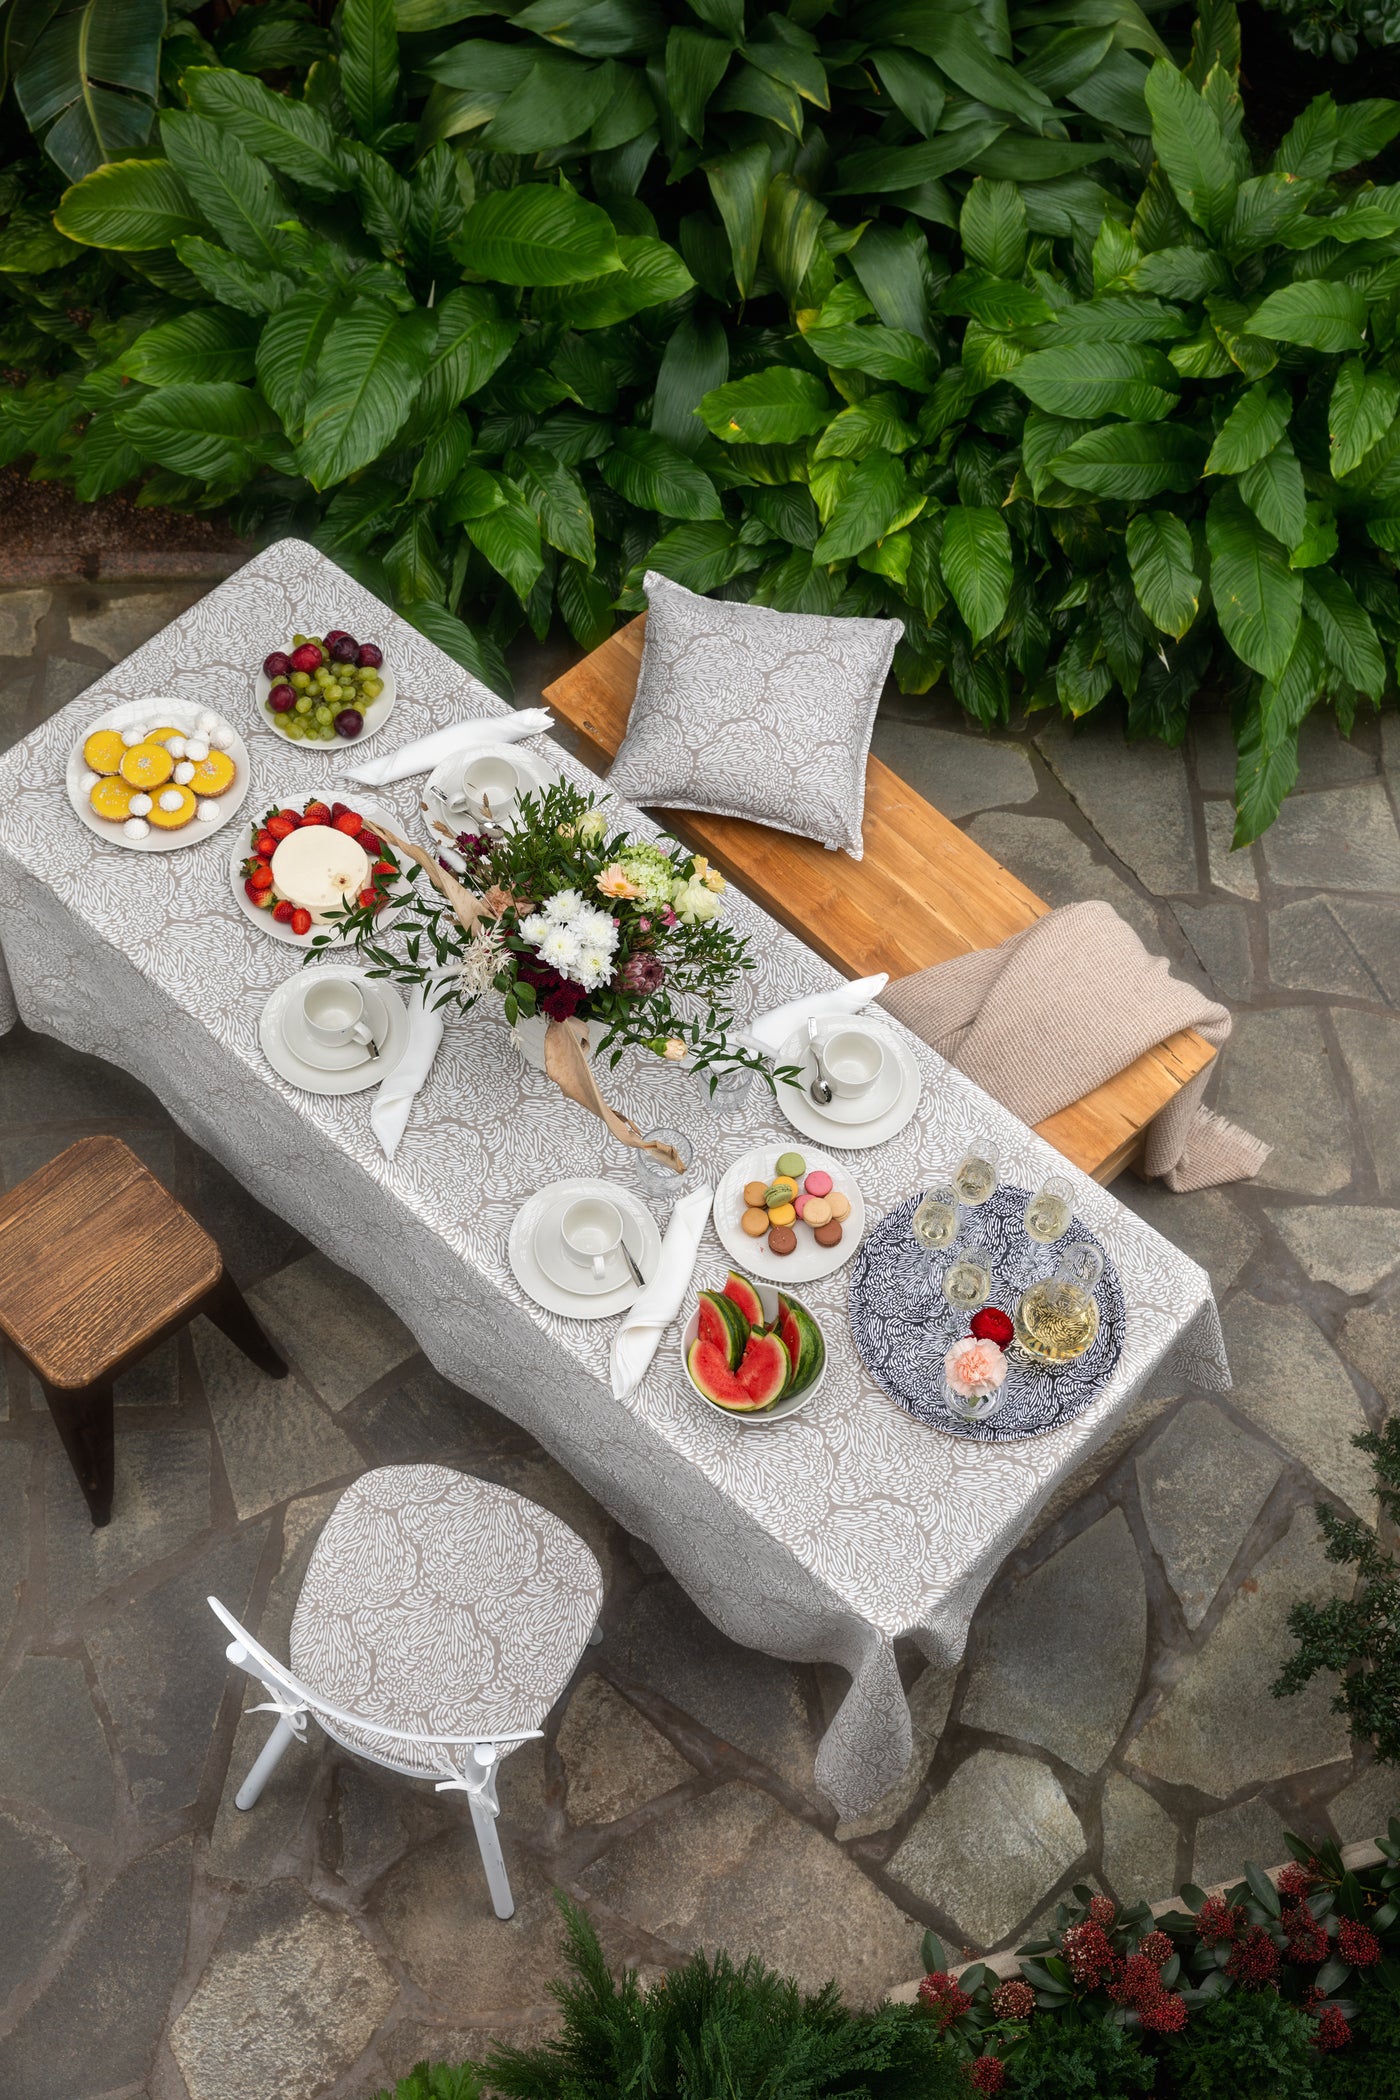 Shop The Look: Set the celebrations into the garden!